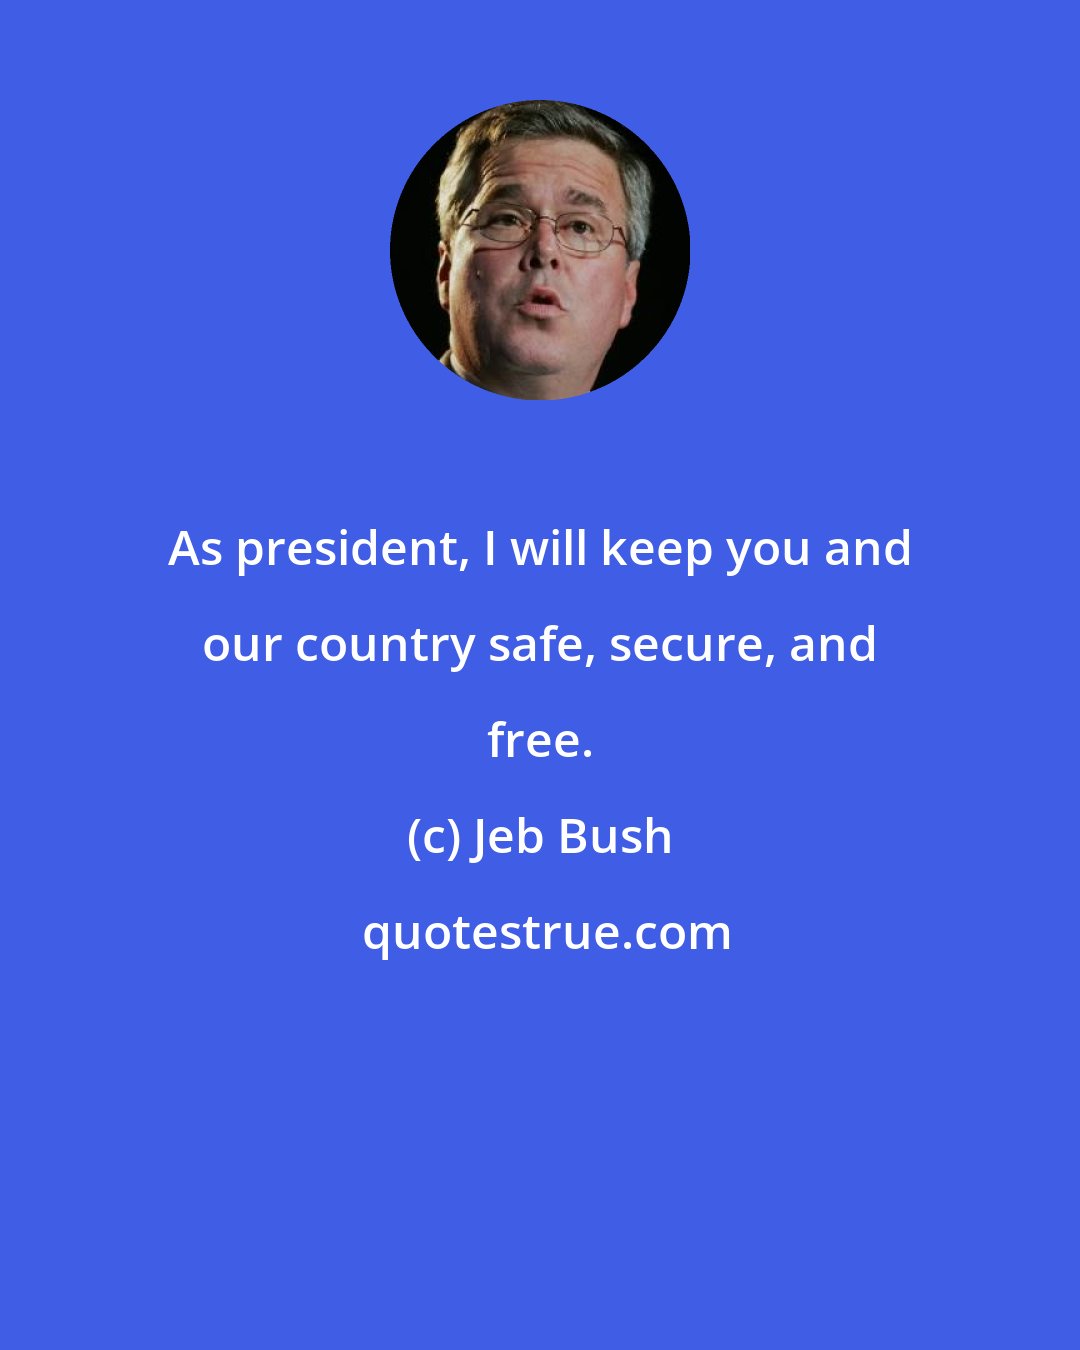 Jeb Bush: As president, I will keep you and our country safe, secure, and free.